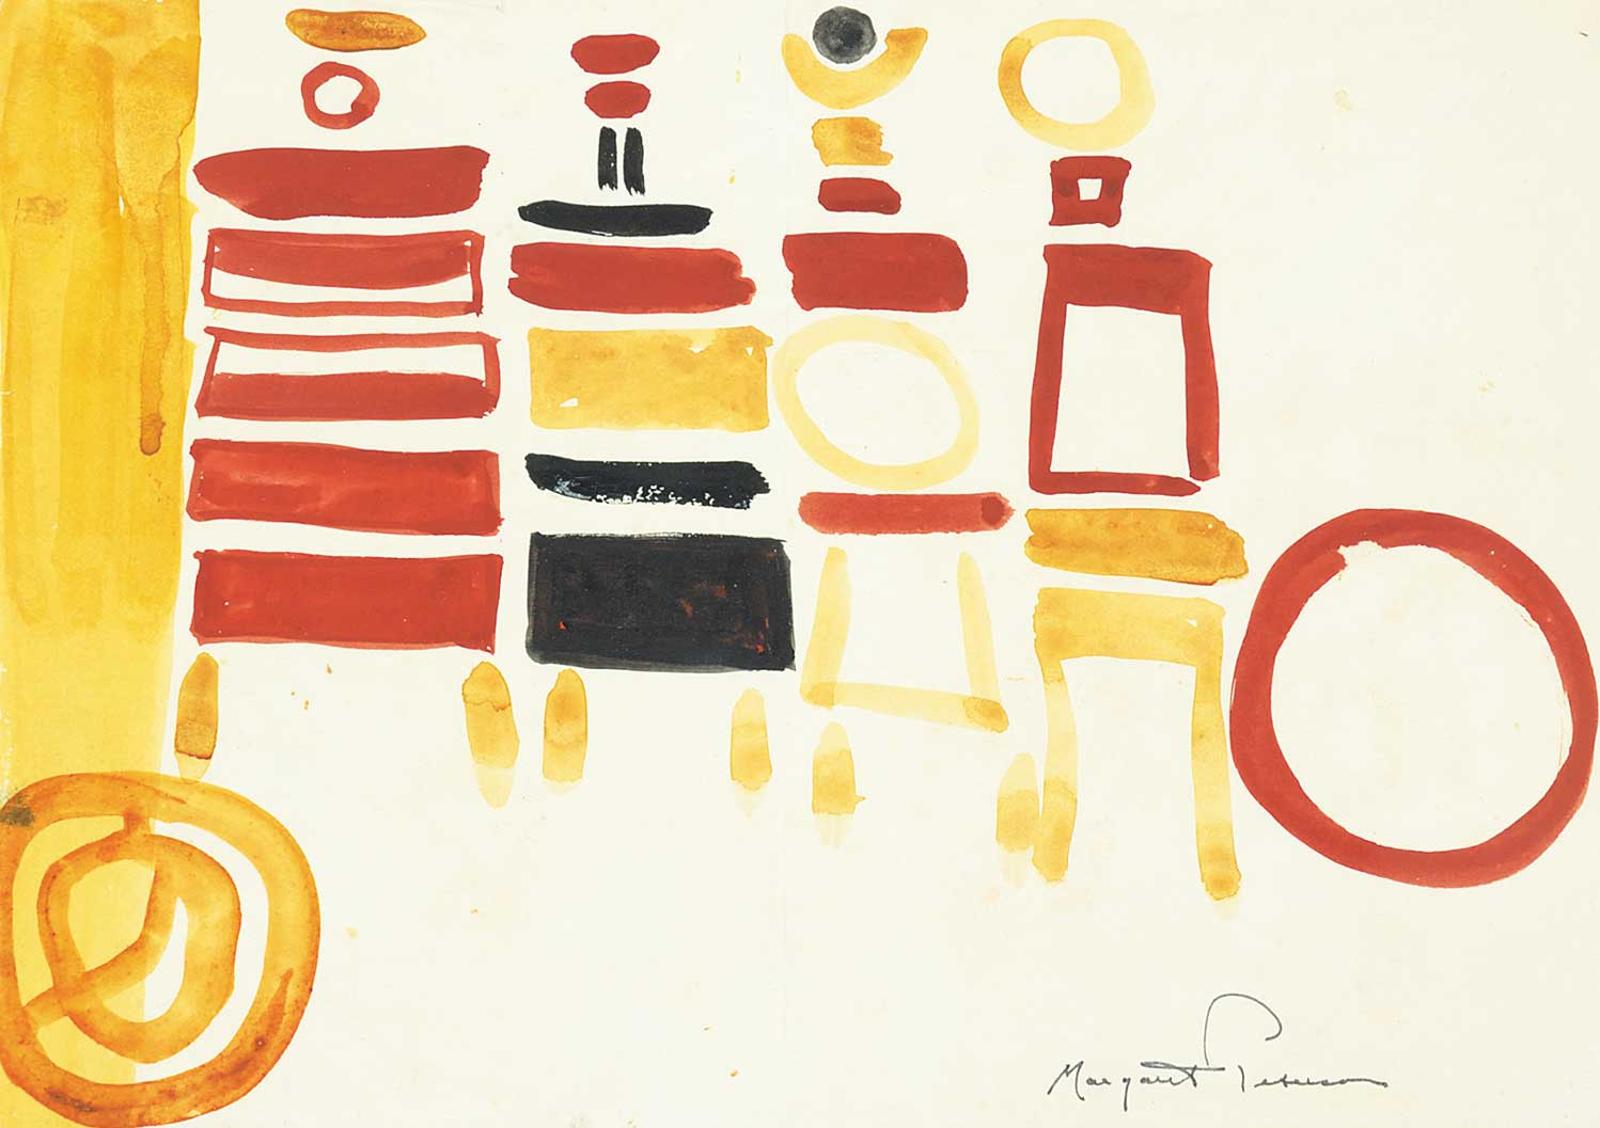 Margaret [O'Hagan] Peterson - Untitled - Red, Yellow and Black Abstract